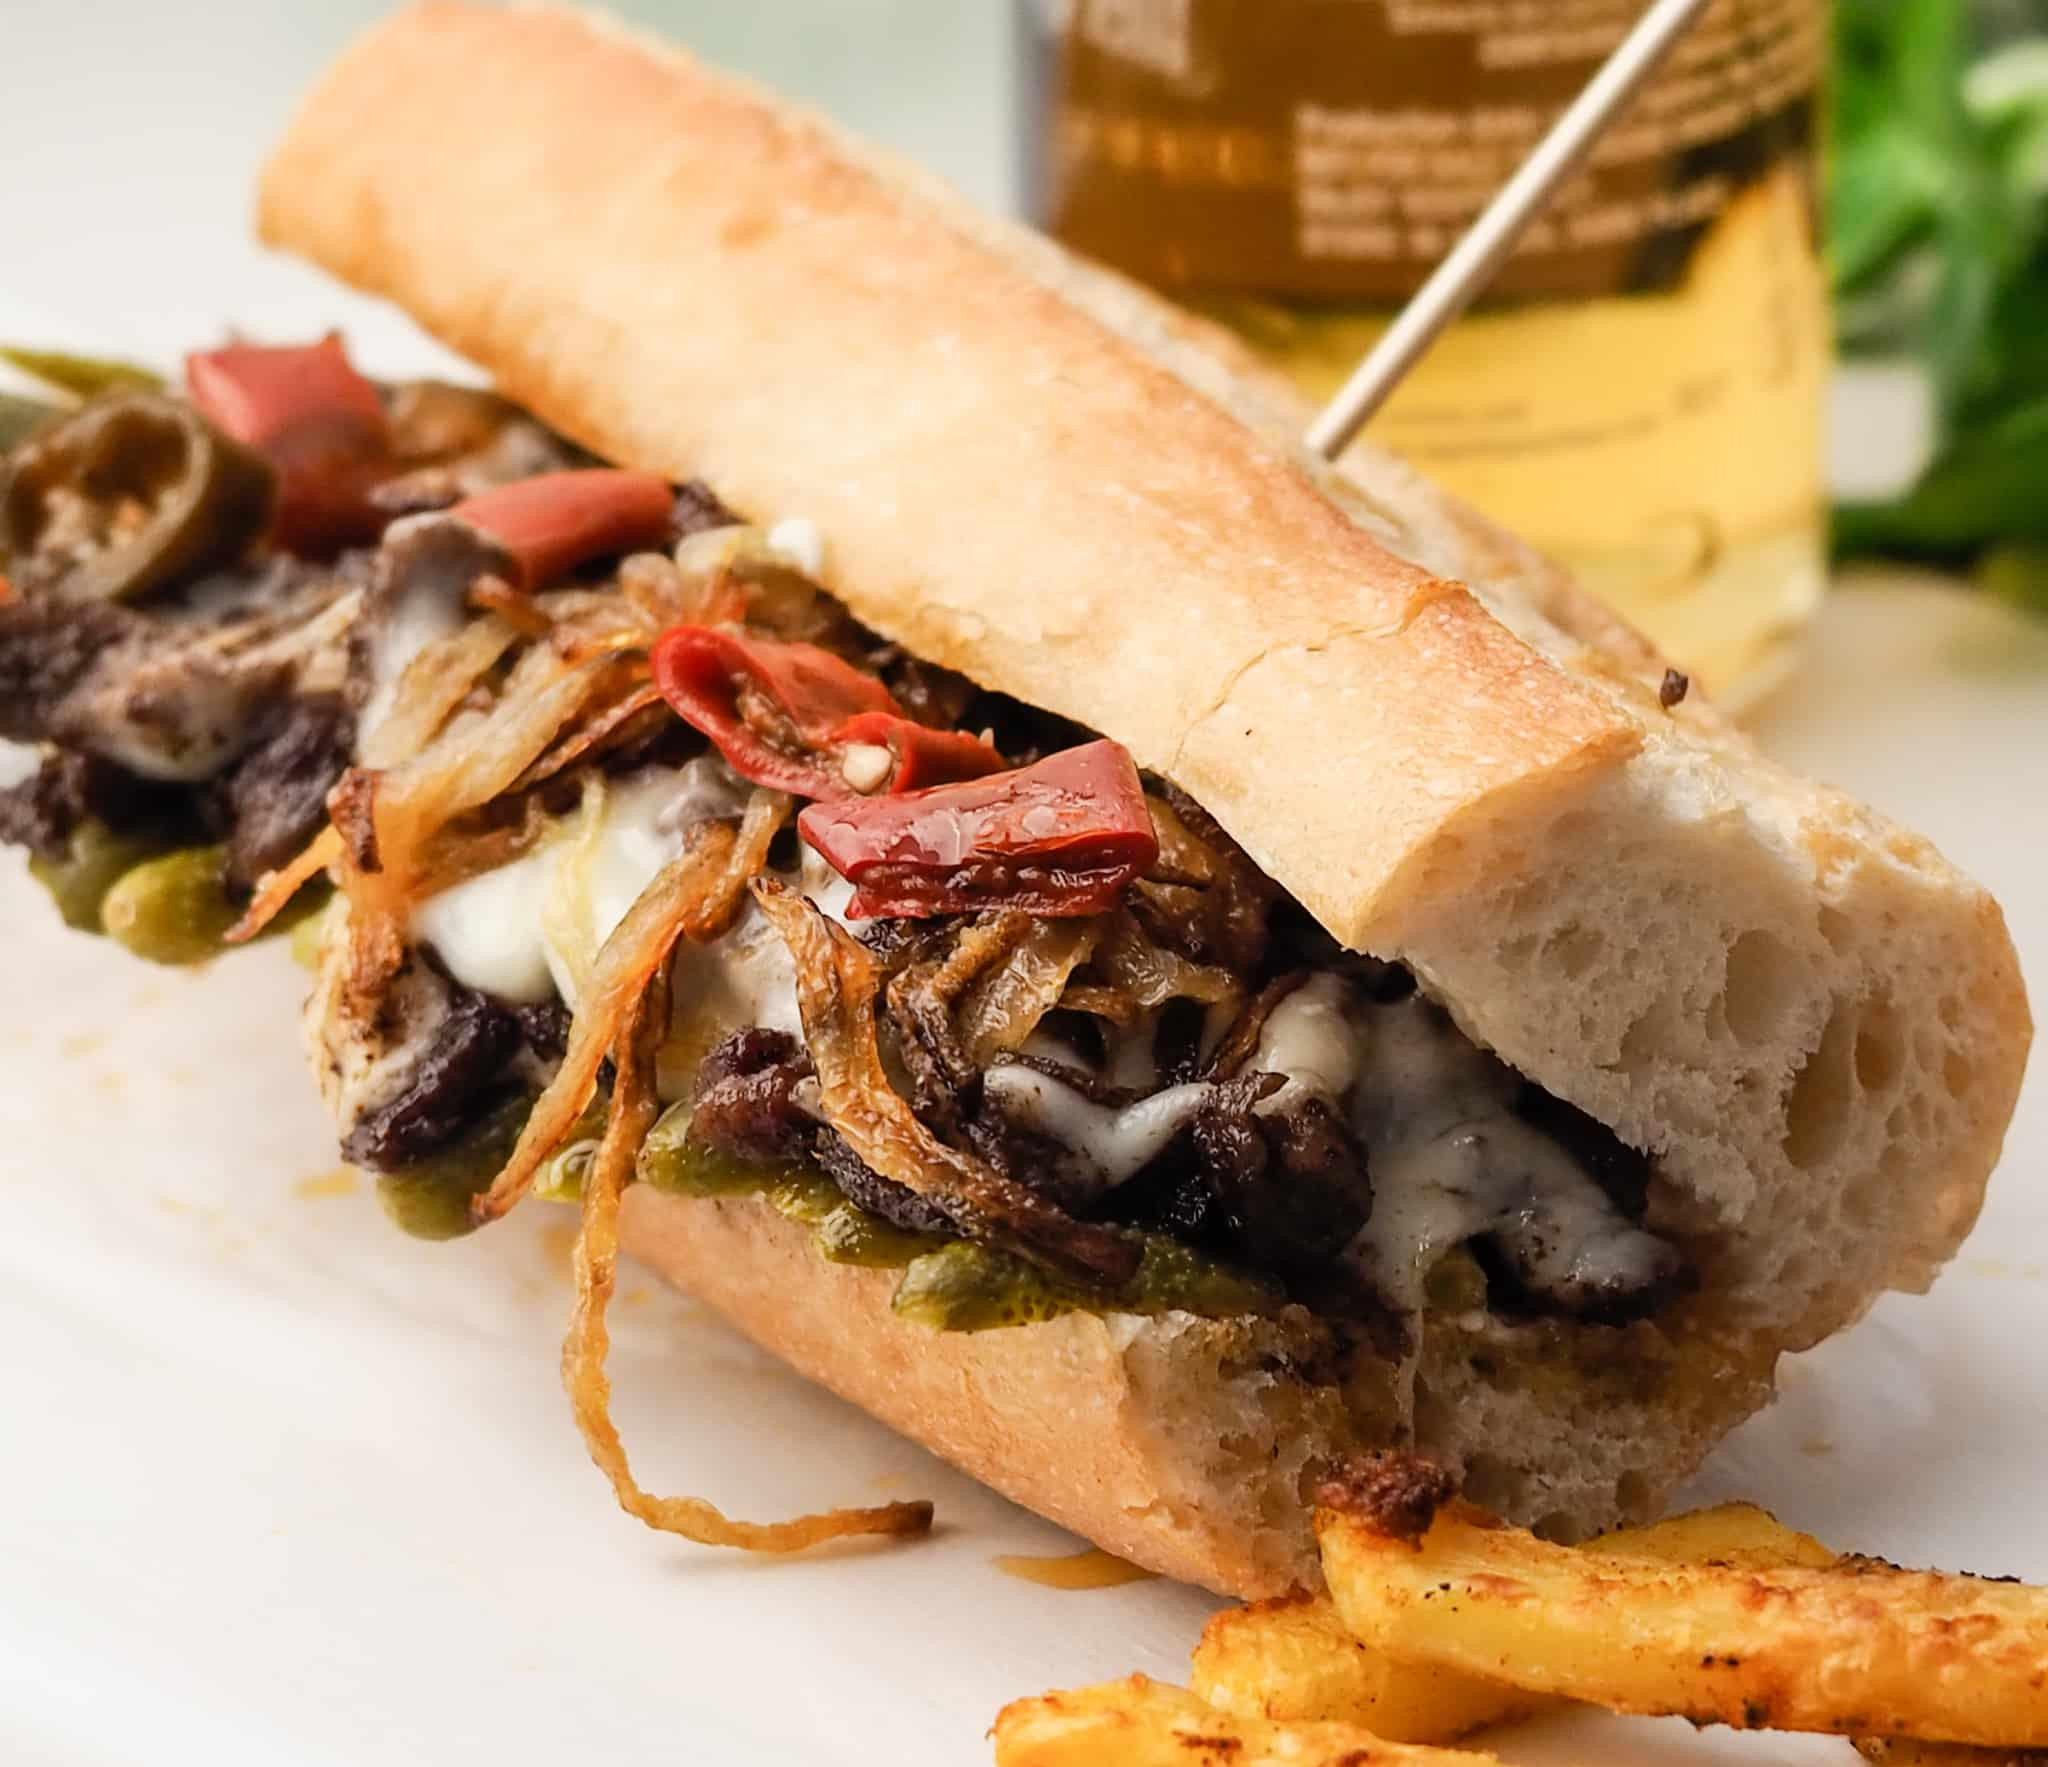 Recipes for Philly Cheese Steak Sandwiches Elegant Gourmet Philly Cheesesteak Recipe Delice Recipes